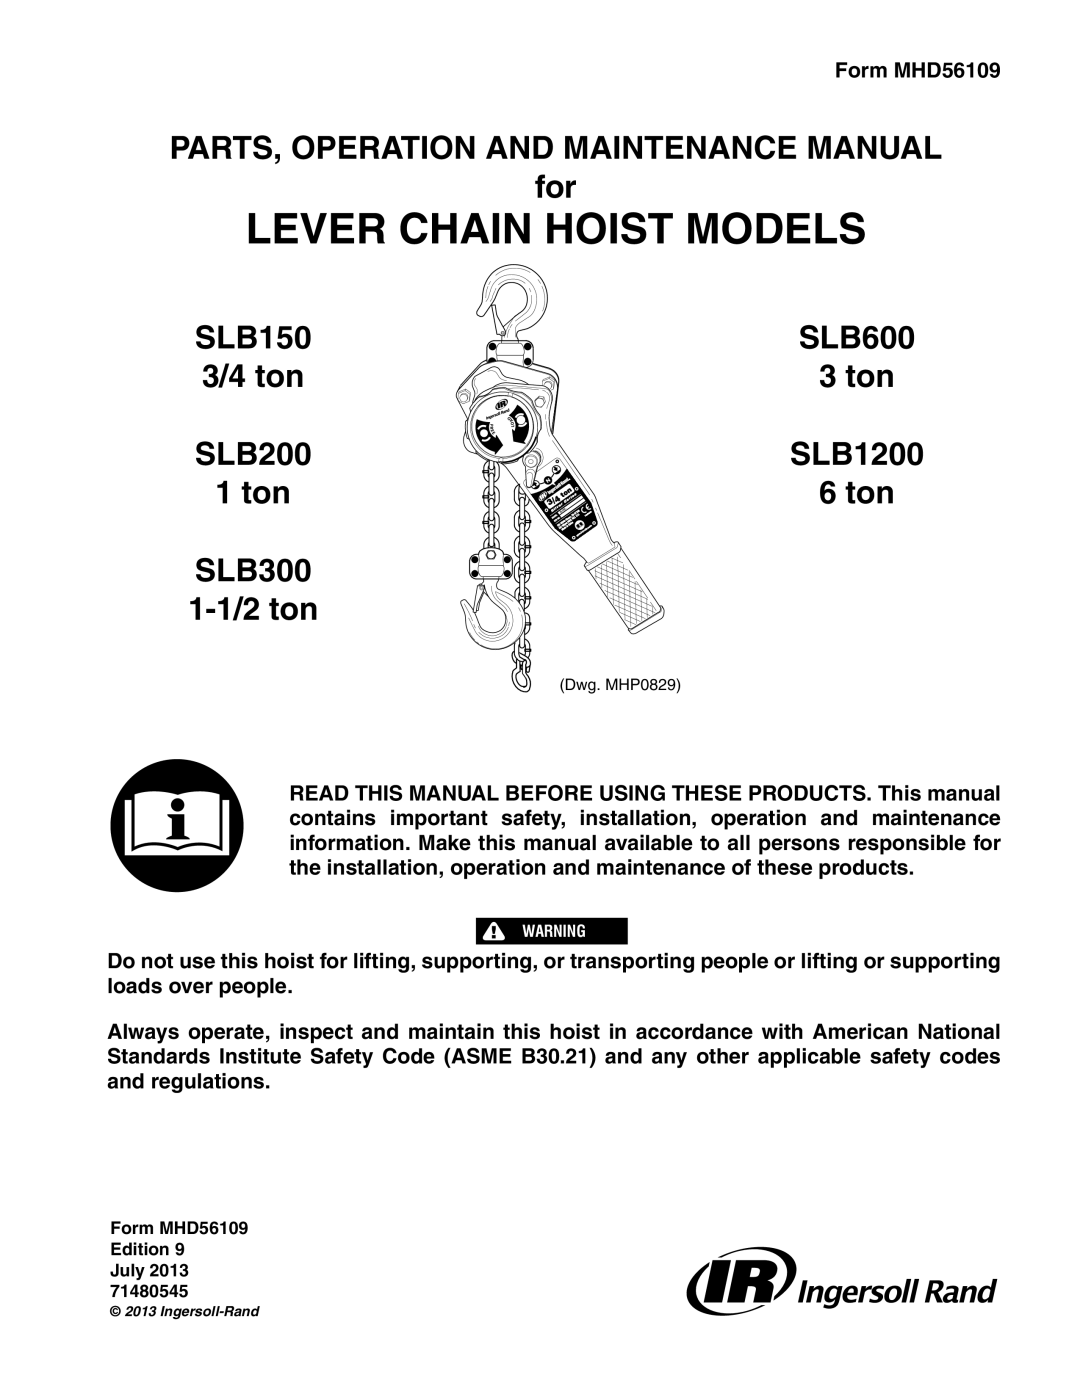 Ingersoll-Rand SLB600, SLB200 manual Lever Chain Hoist Models, PARTS, OPERATION AND MAINTENANCE MANUAL for, SLB150 3/4 ton 